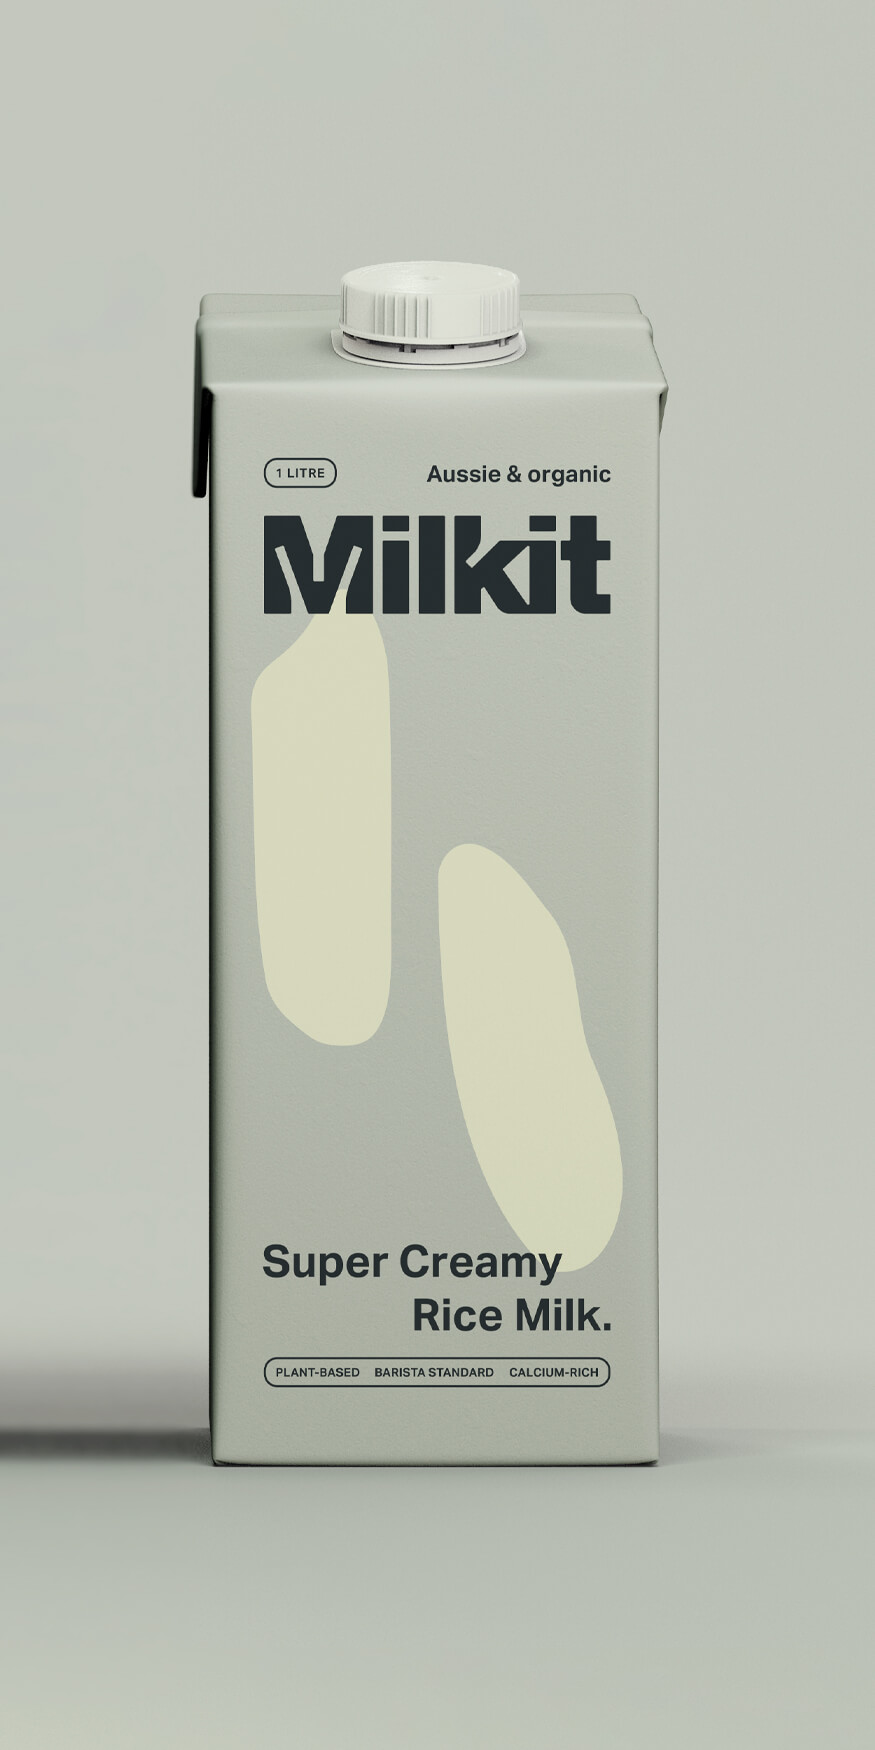 Packaging design for a carton of Milkit Rice Milk featuring minimal rice brand illustration.